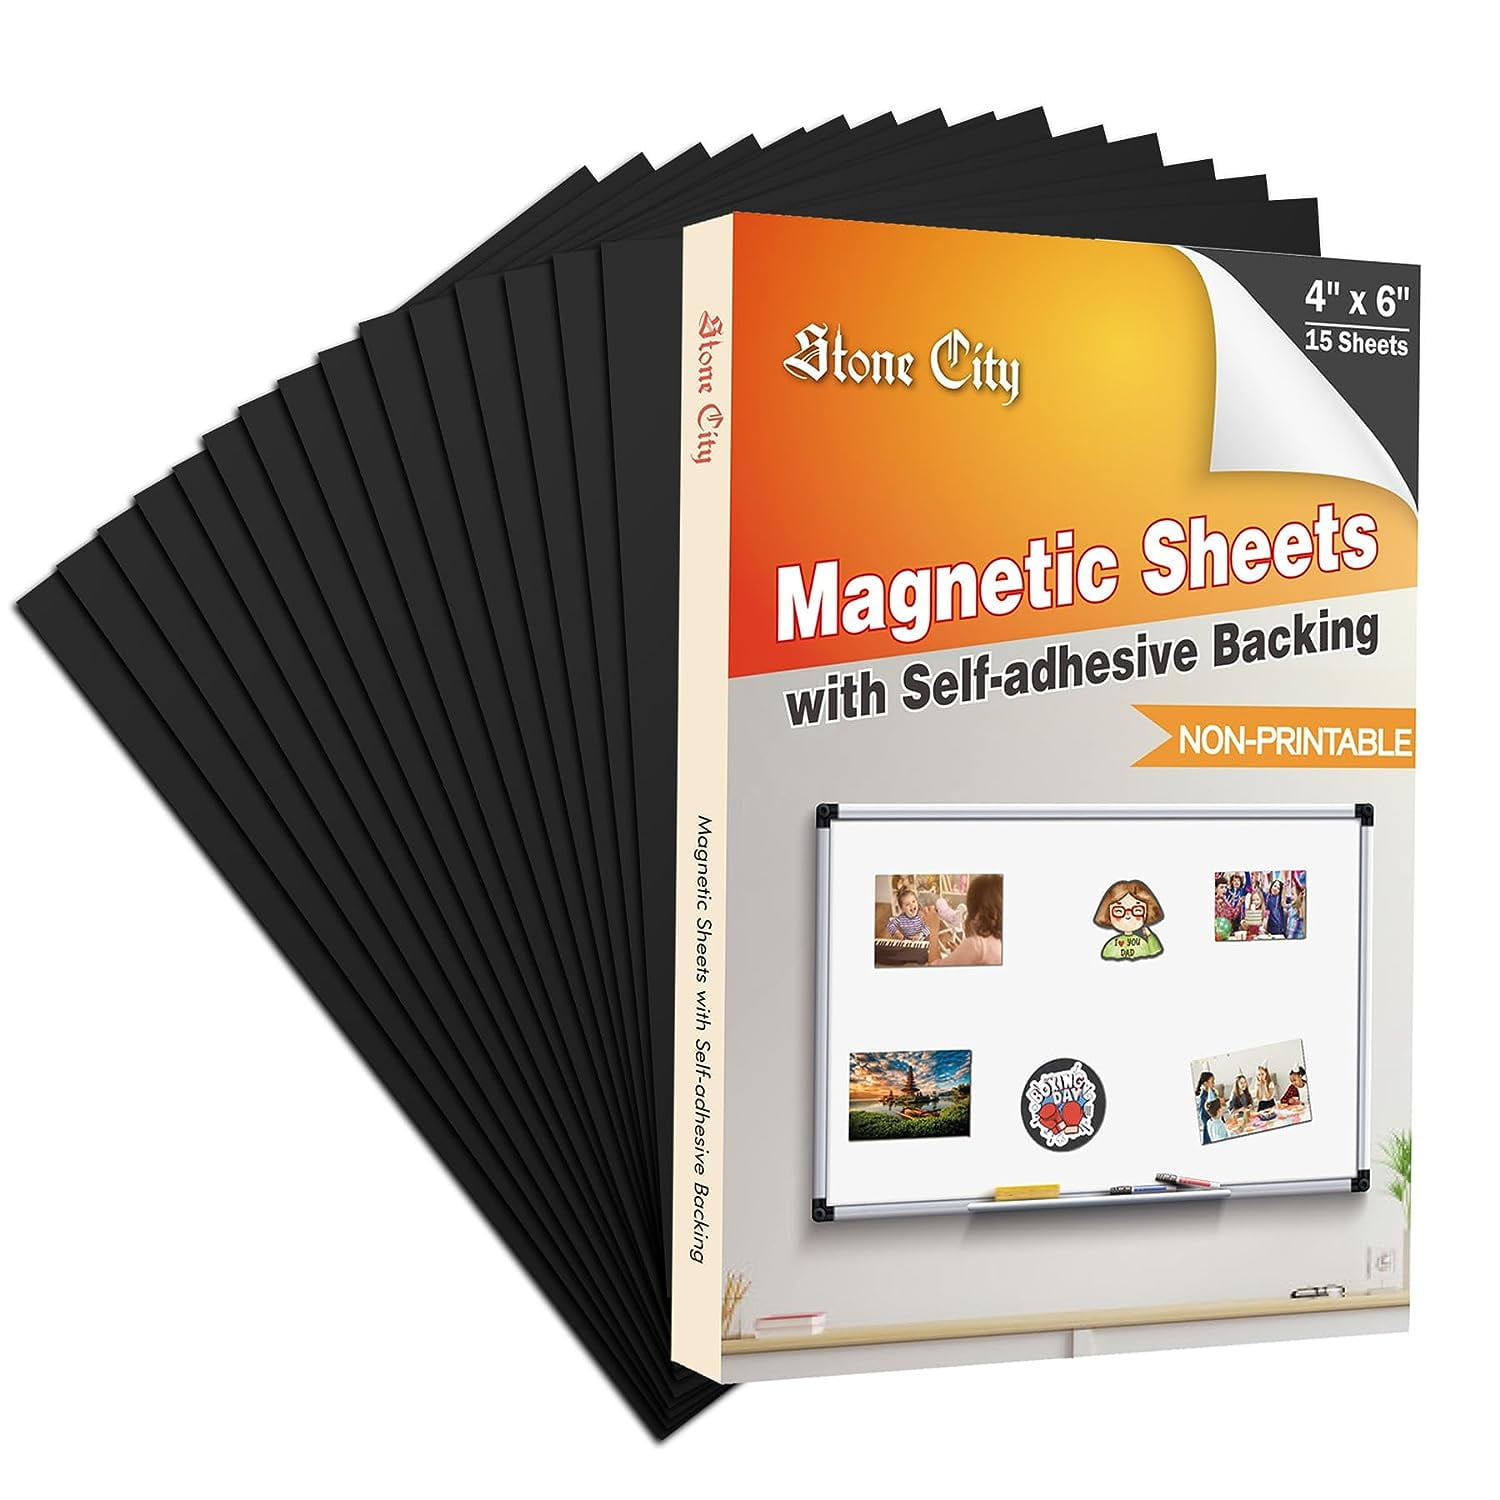 STONE CITY Adhesive Magnetic Sheets 4X6 Inch, 15 Pack, Magnet Sheets with  Adhesive Backing, Flexible Magnet Sheets for Crafts, Photos, Fridge